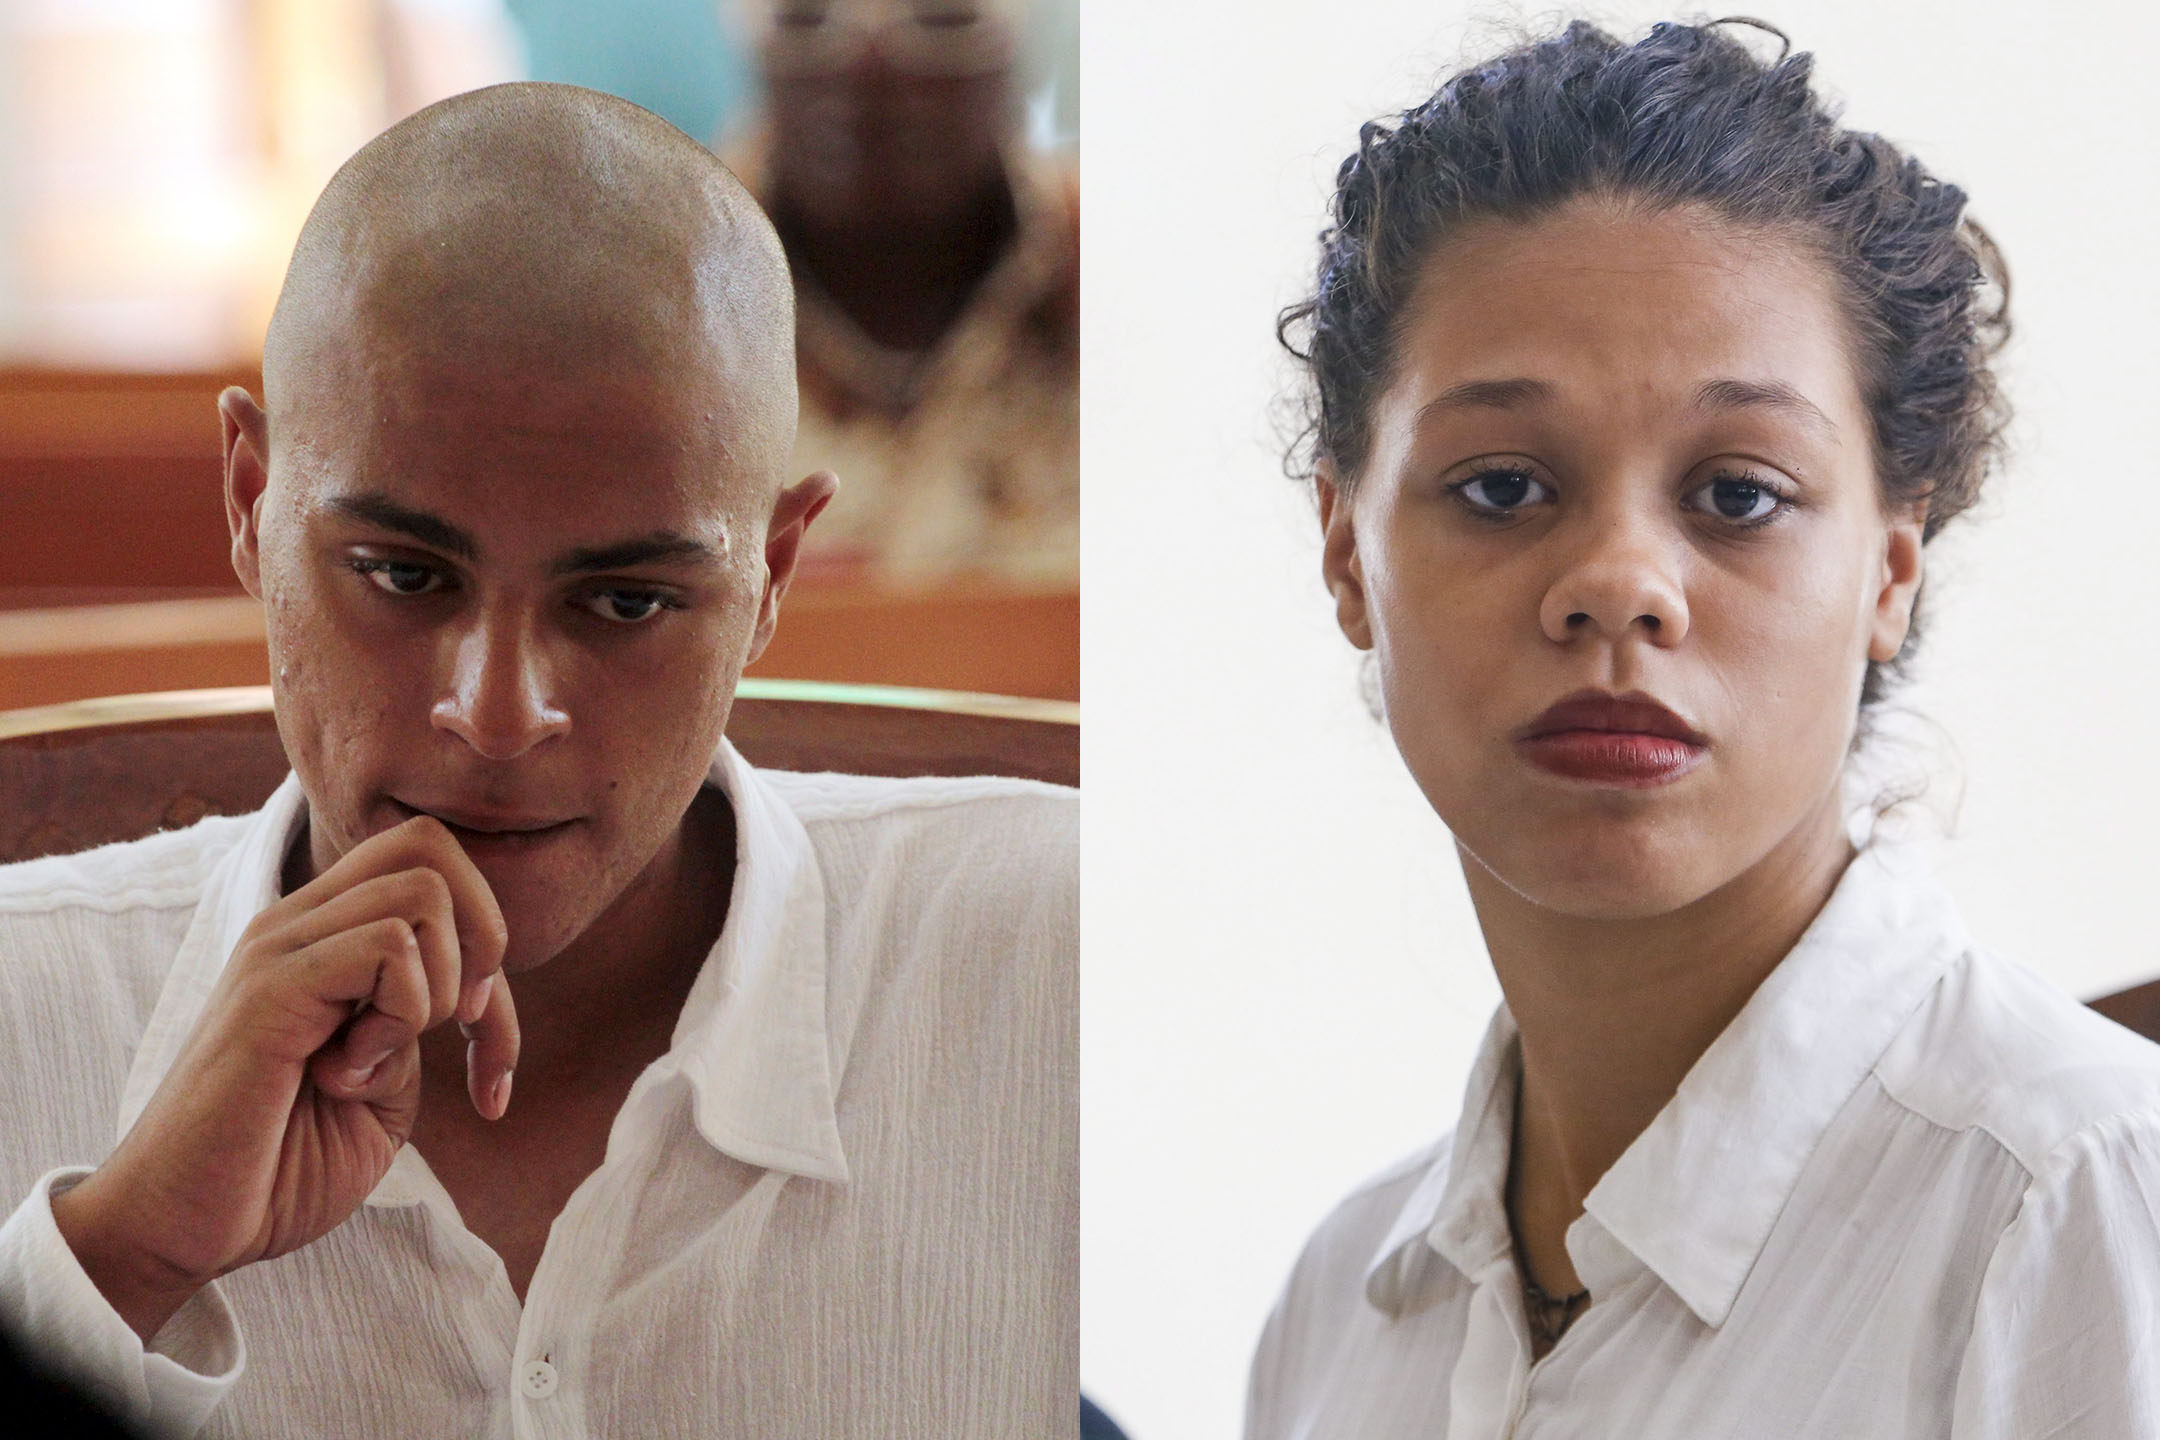 Tommy Schaefer and Heather Louis Mack in a courtroom during their first hearing trials in Denpasar, Bali, Indonesia on Jan. 14, 2015. (AP; EPA)